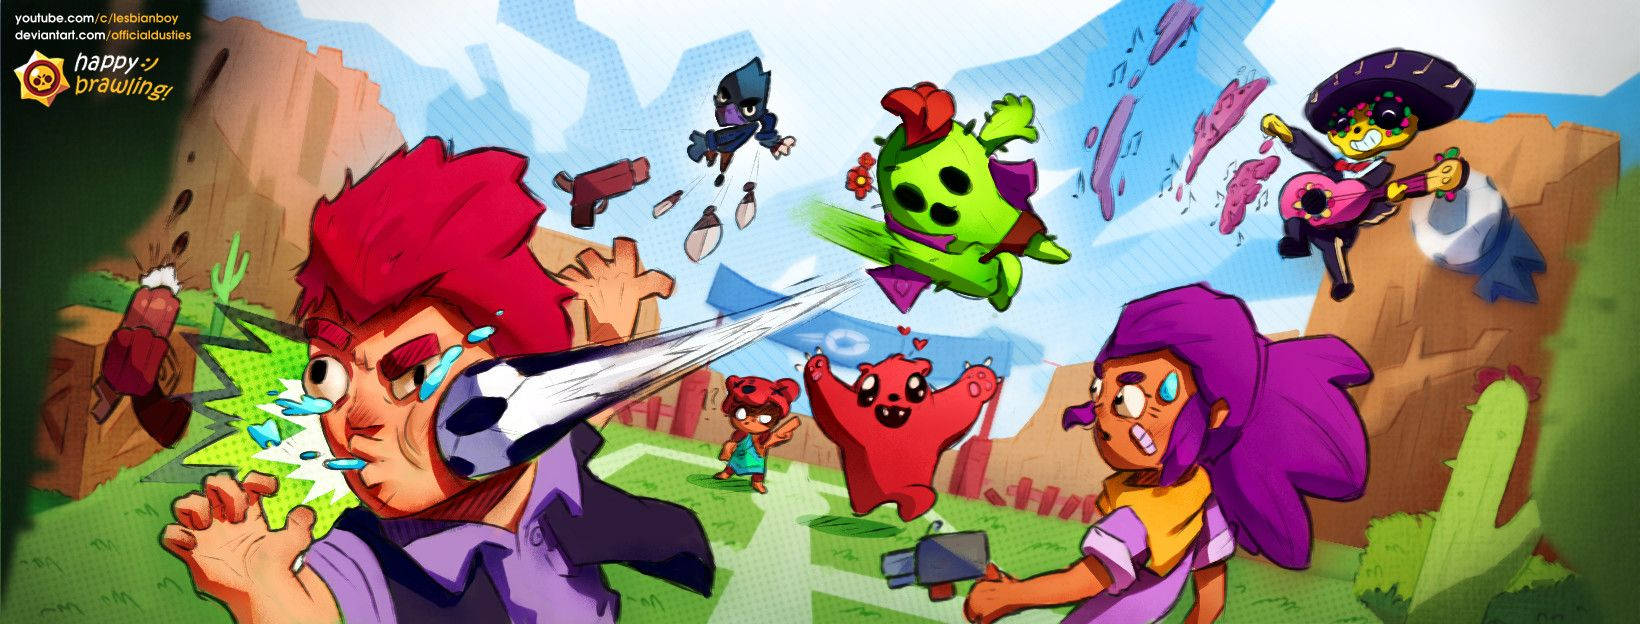 The High-Stakes Fight of the Brawl Stars Brawlers! Wallpaper